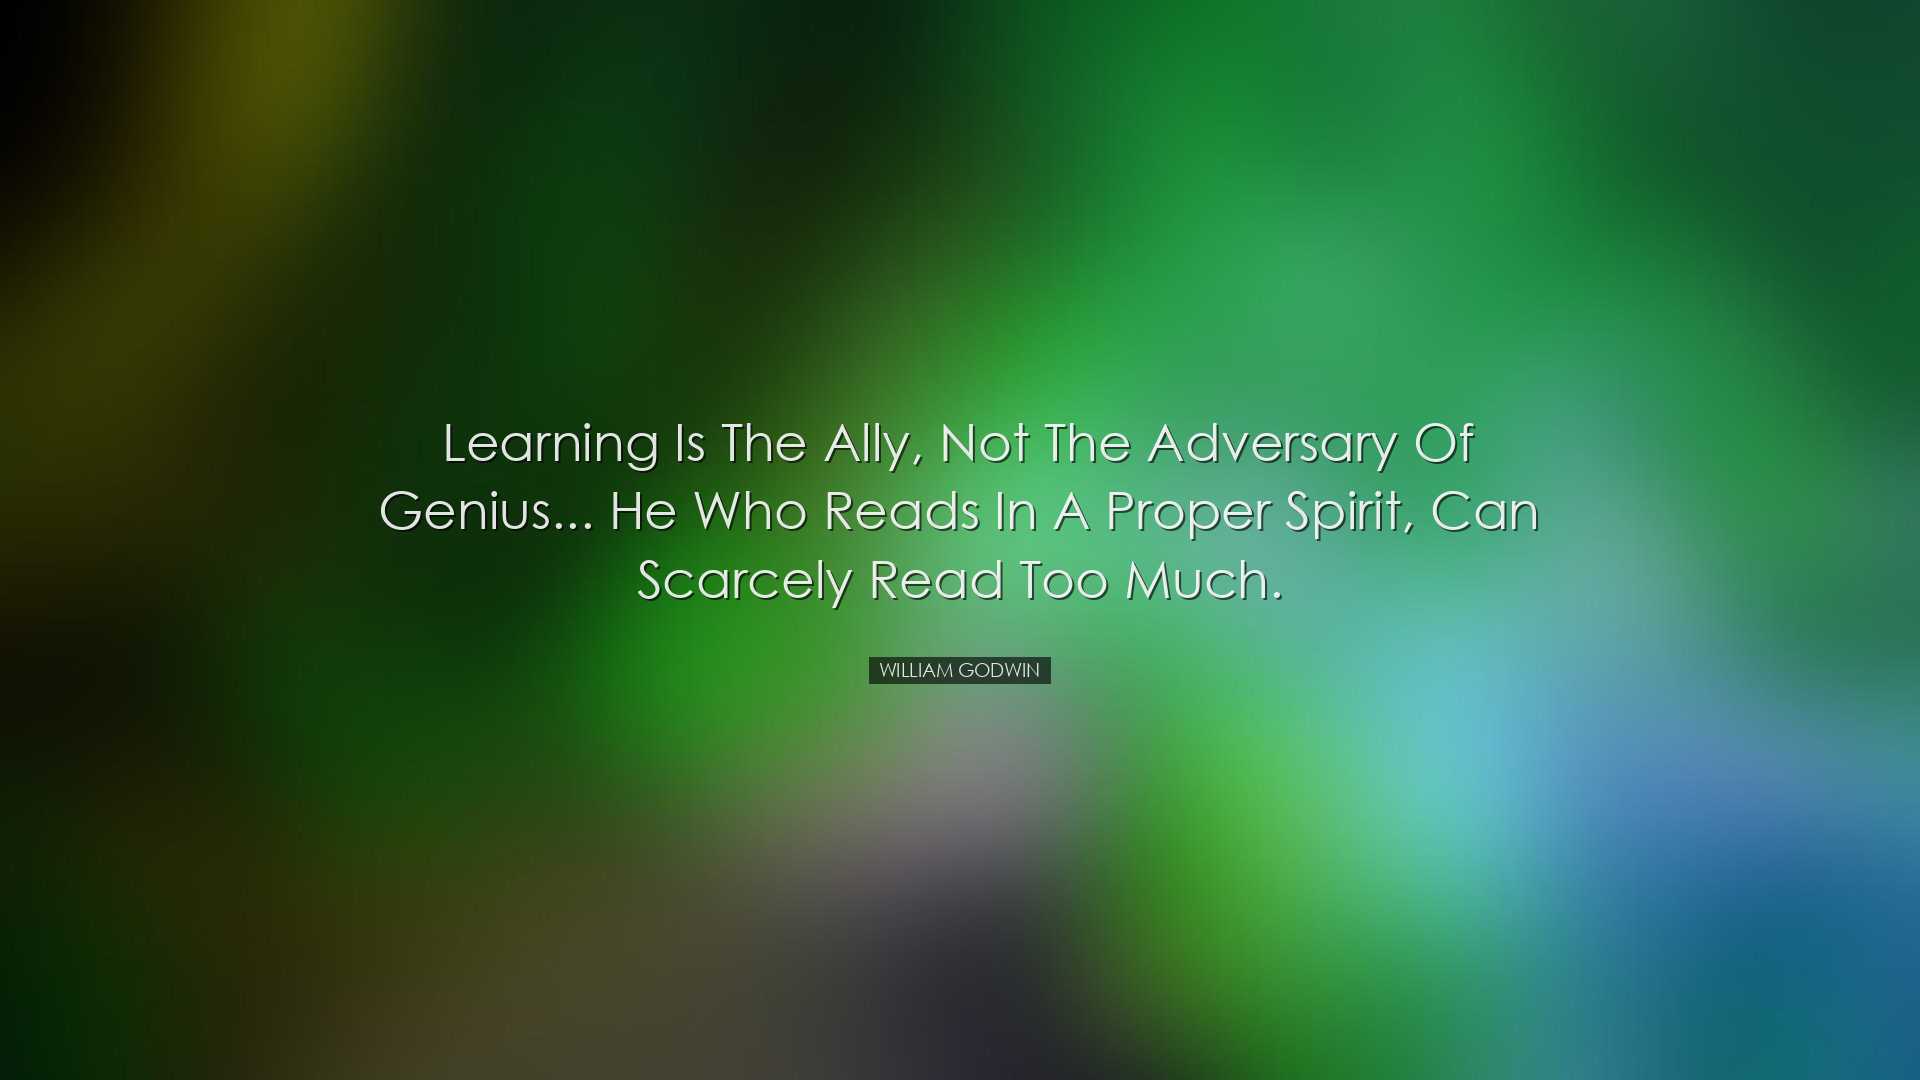 Learning is the ally, not the adversary of genius... he who reads